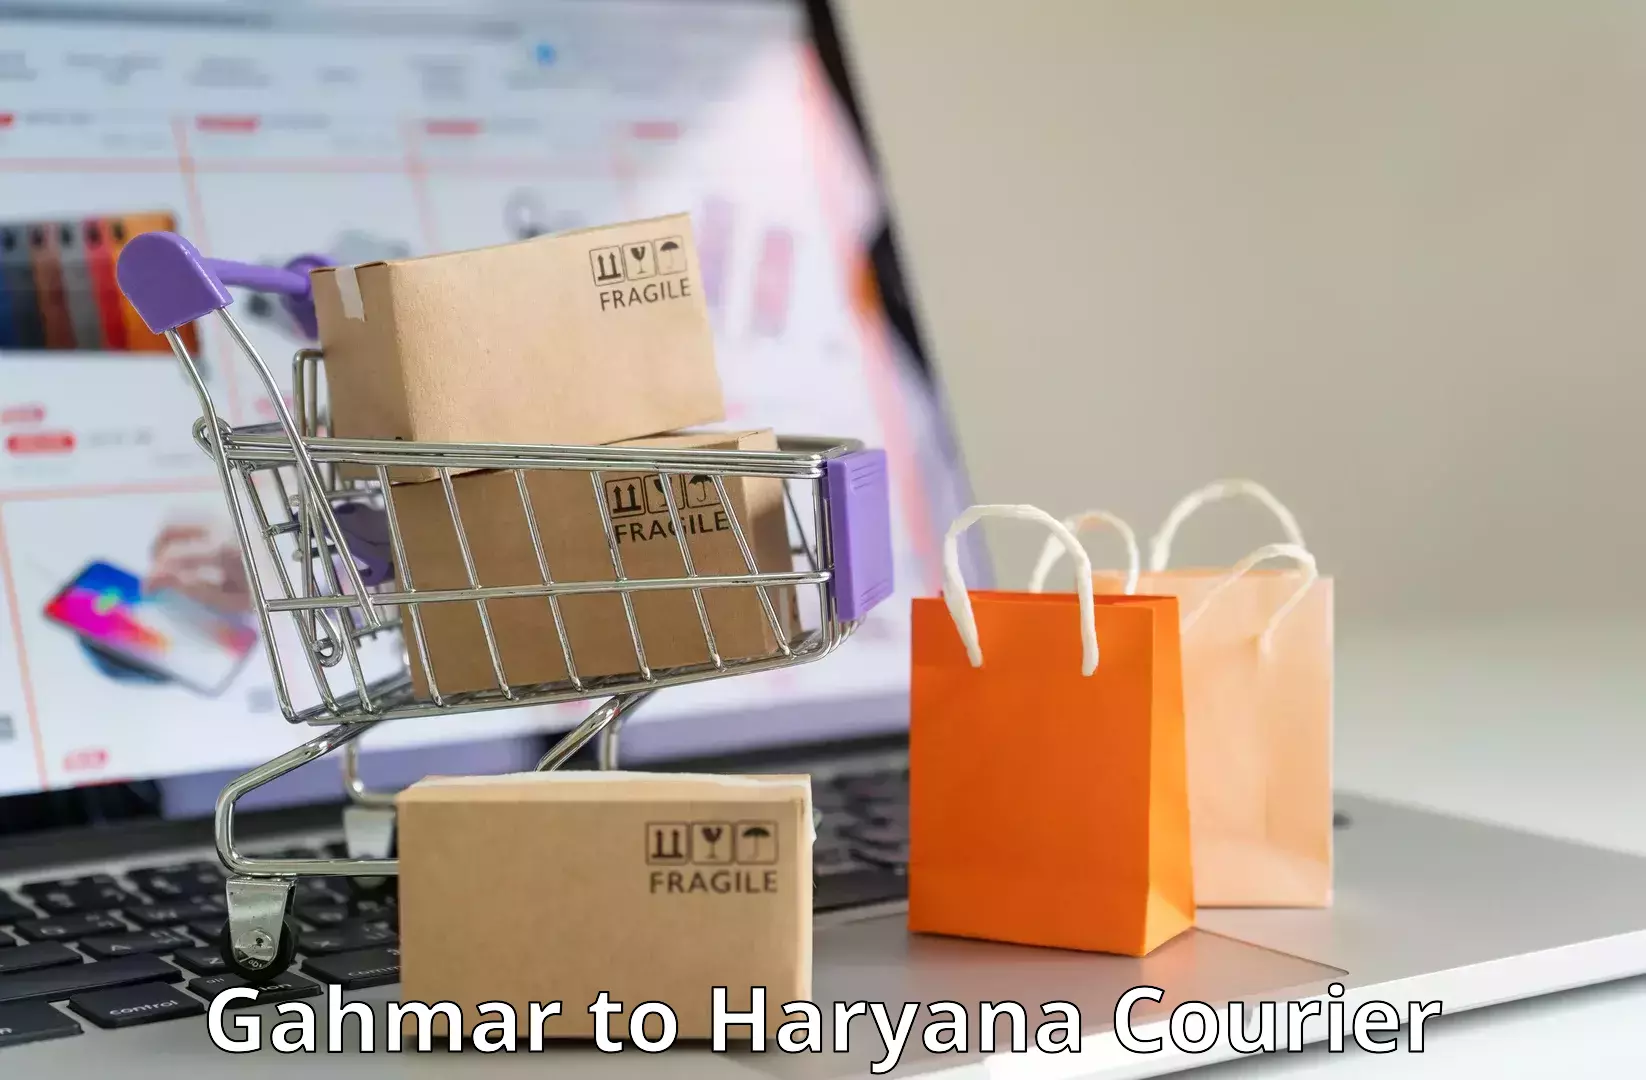 Full-service courier options Gahmar to Nuh